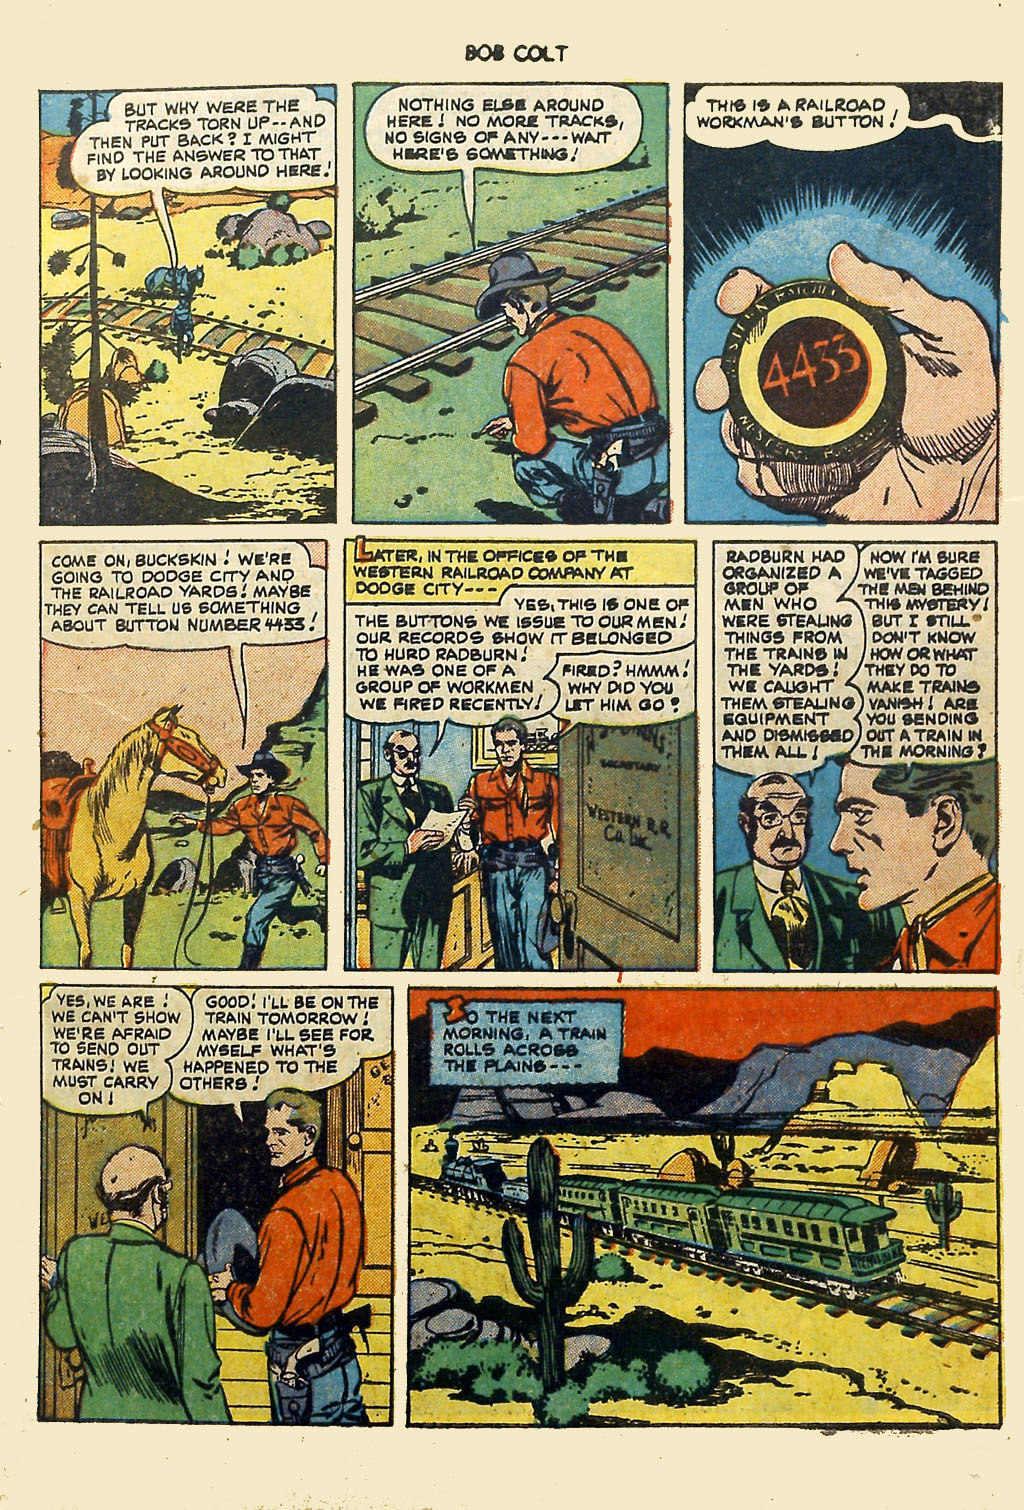 Read online Bob Colt Western comic -  Issue #2 - 7